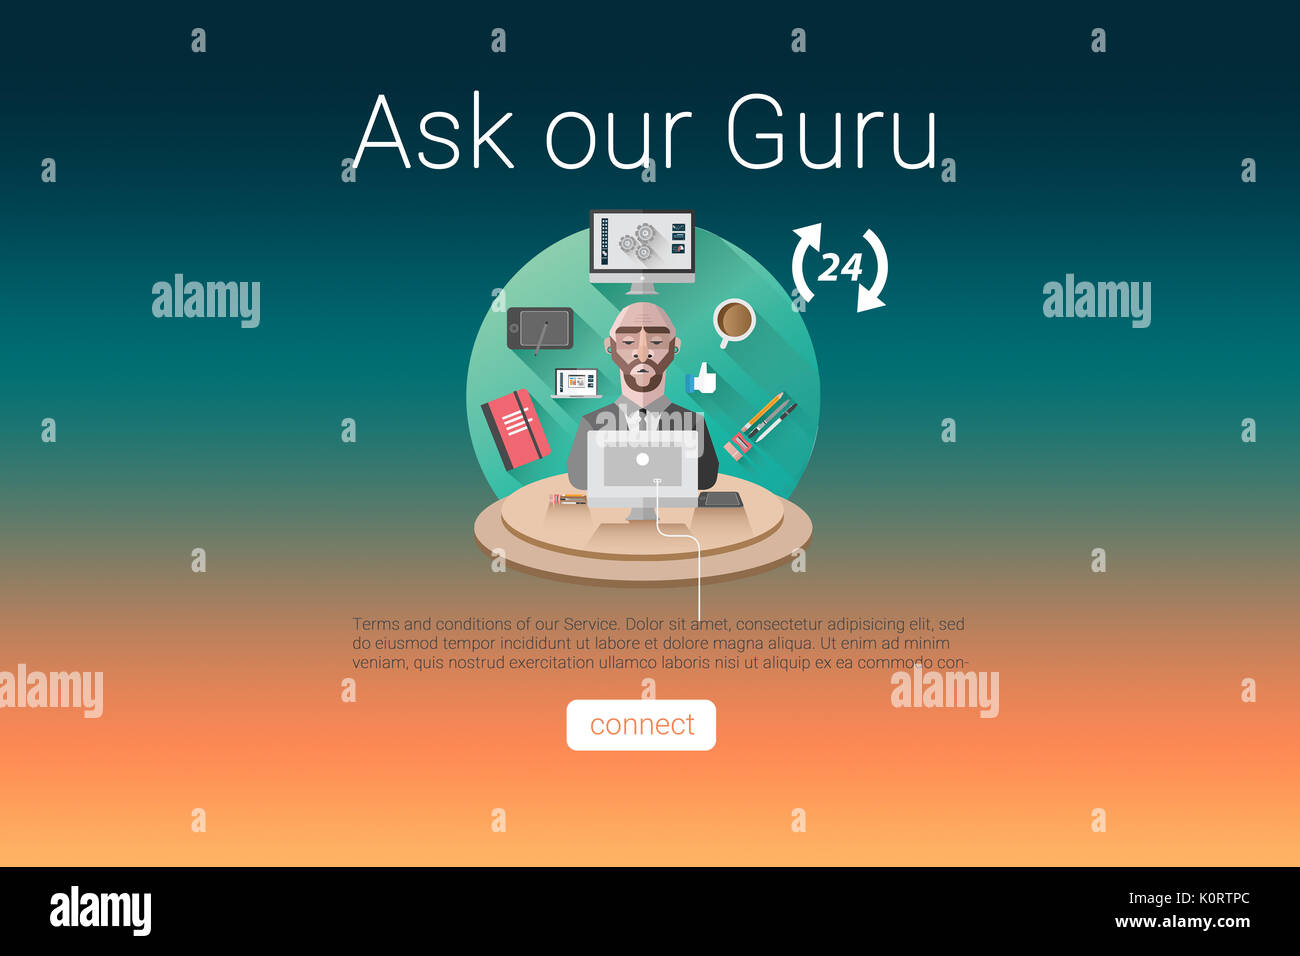 Ask our guru text with icons against turquoise and orange background Stock Photo